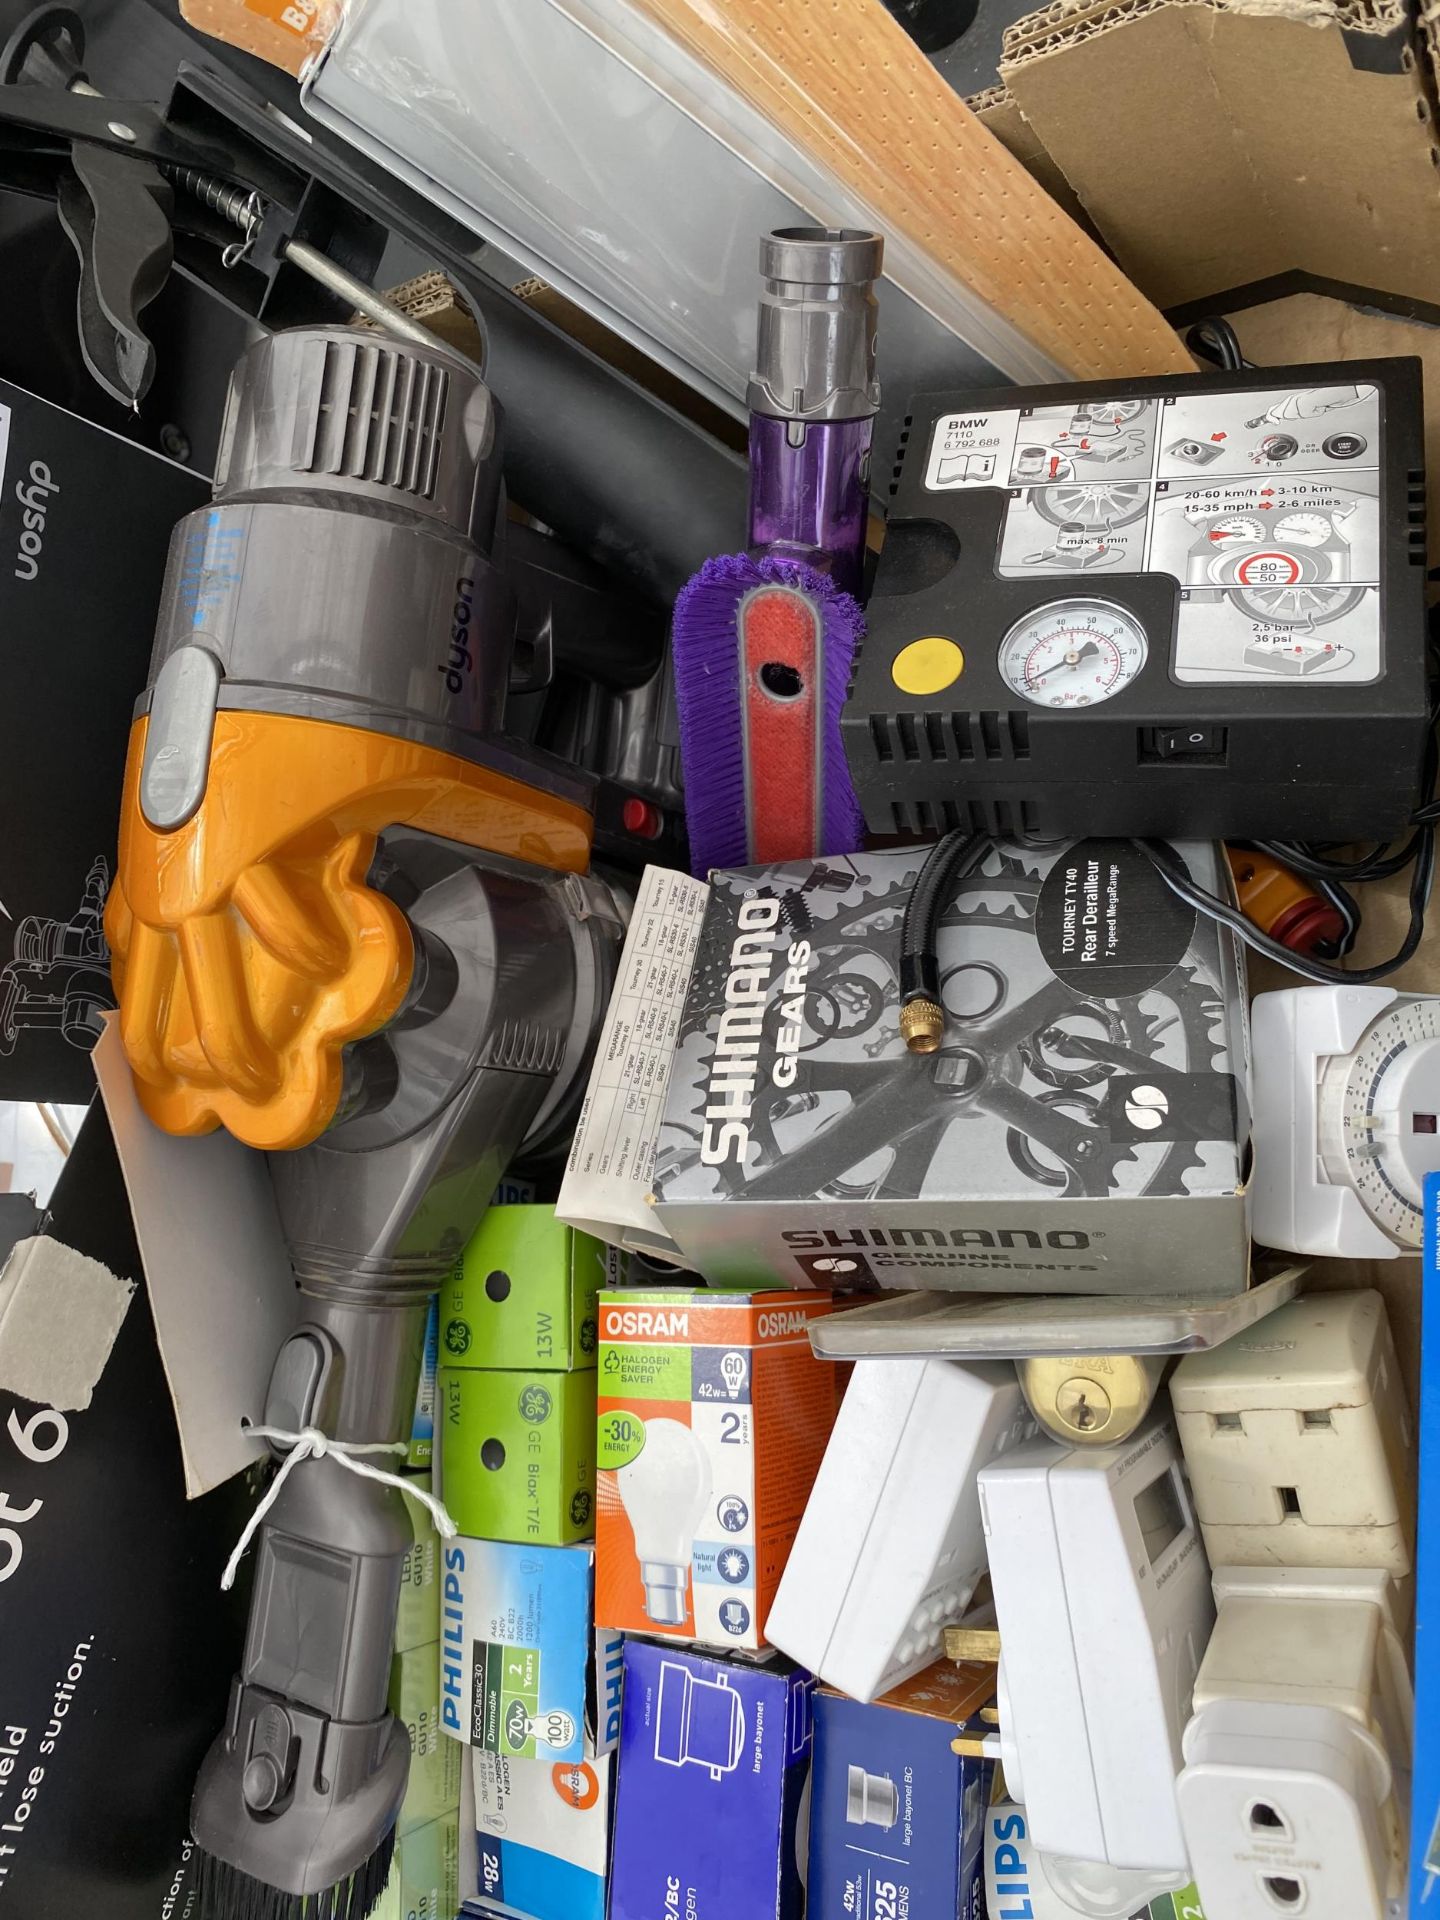 A DYSON HANDHELD VACUUM CLEANER AND AN ASSORTMENT OF LIGHT BULBS - Image 2 of 2